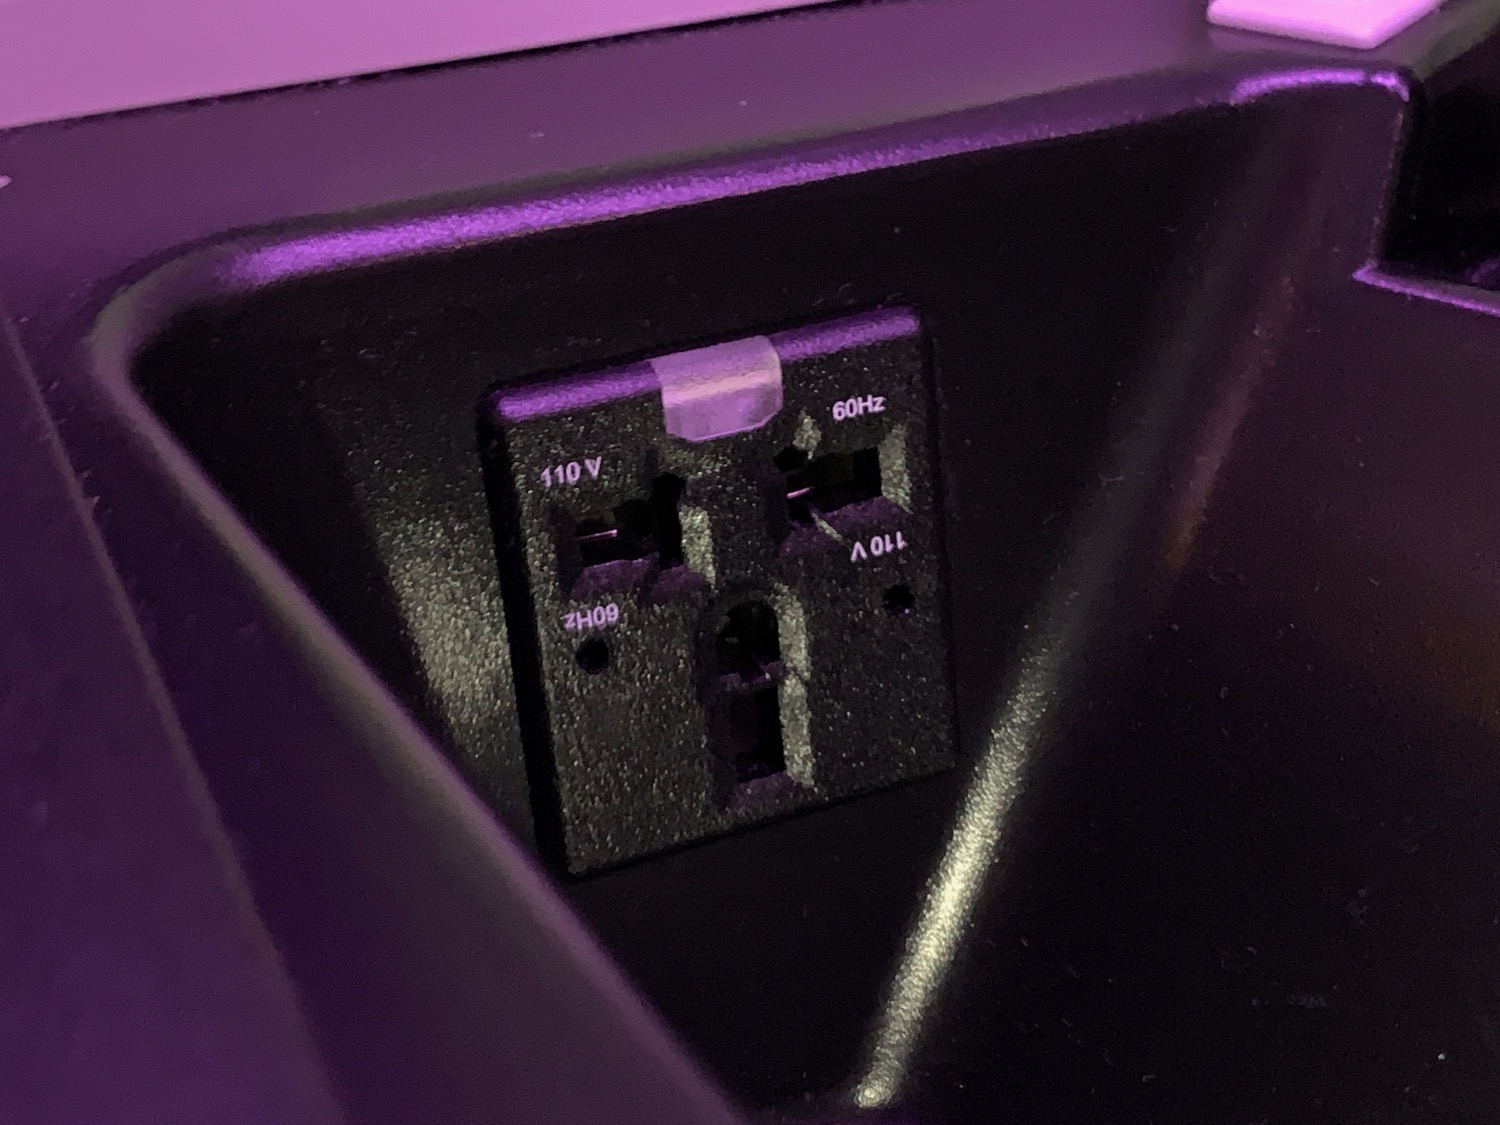 a black outlet with white text